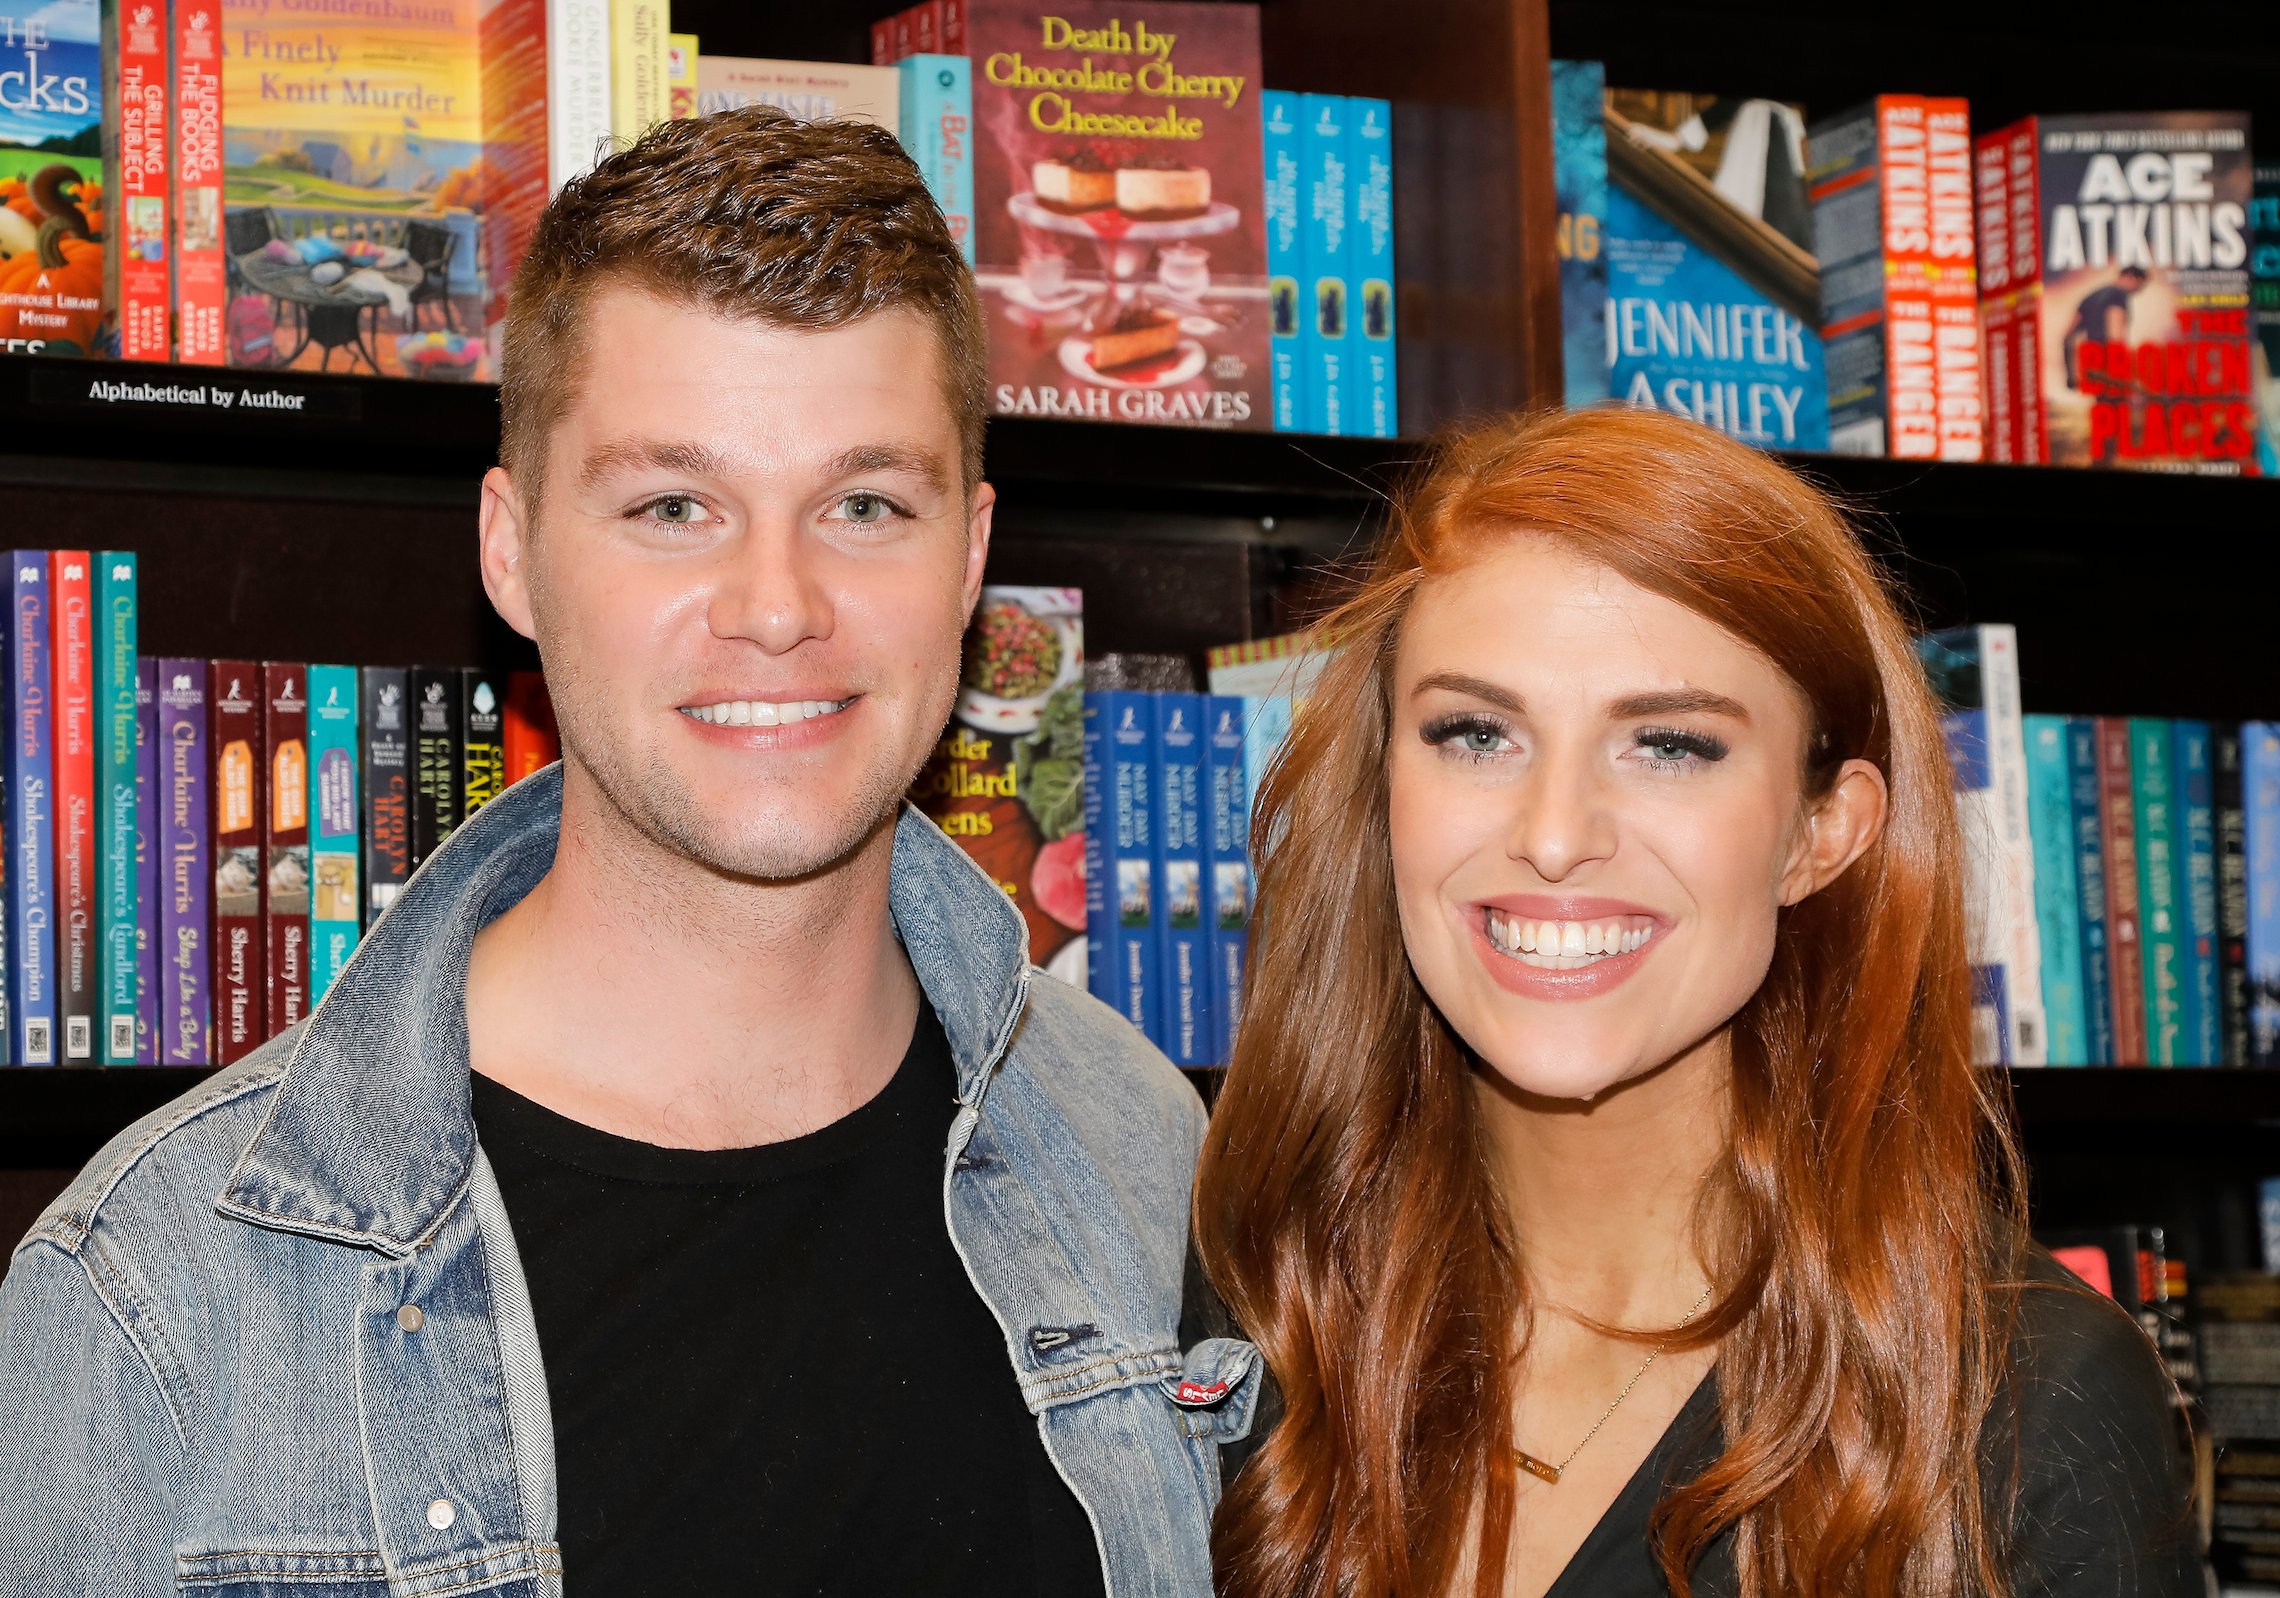 Jeremy Roloff, a member of the Roloff family from TLC's 'Little People, Big World,' and his wife, Audrey Roloff, smiling at a book signing